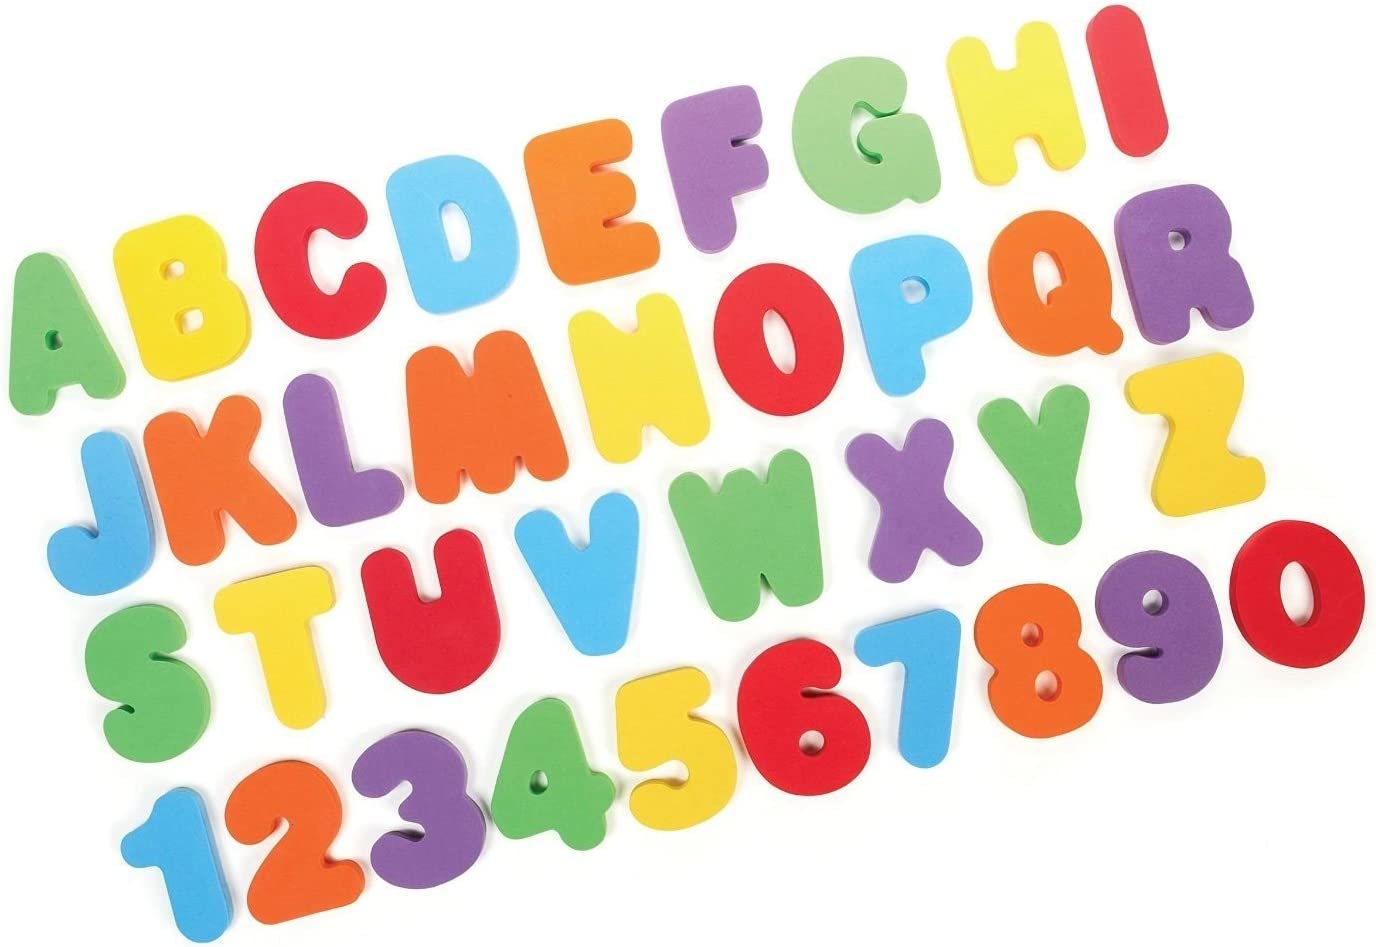 Little Tikes - Foam Letters & Numbers, 36 Count, Educational Alphabet Counting Colorful Kids